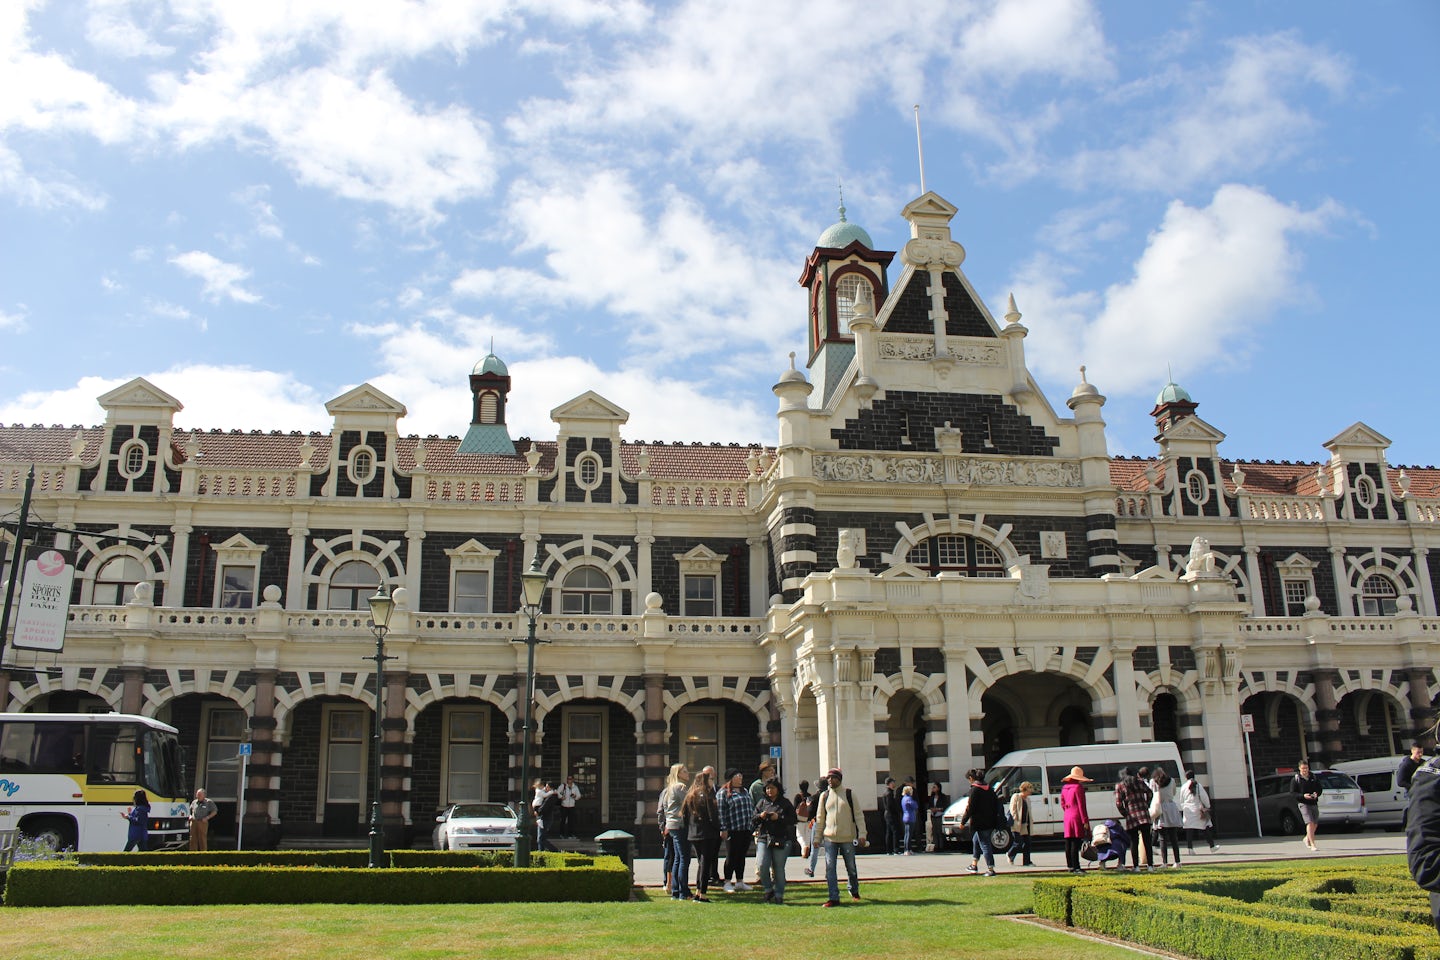 Railway building at Dunedin. Scottish influence can be seen throughout the